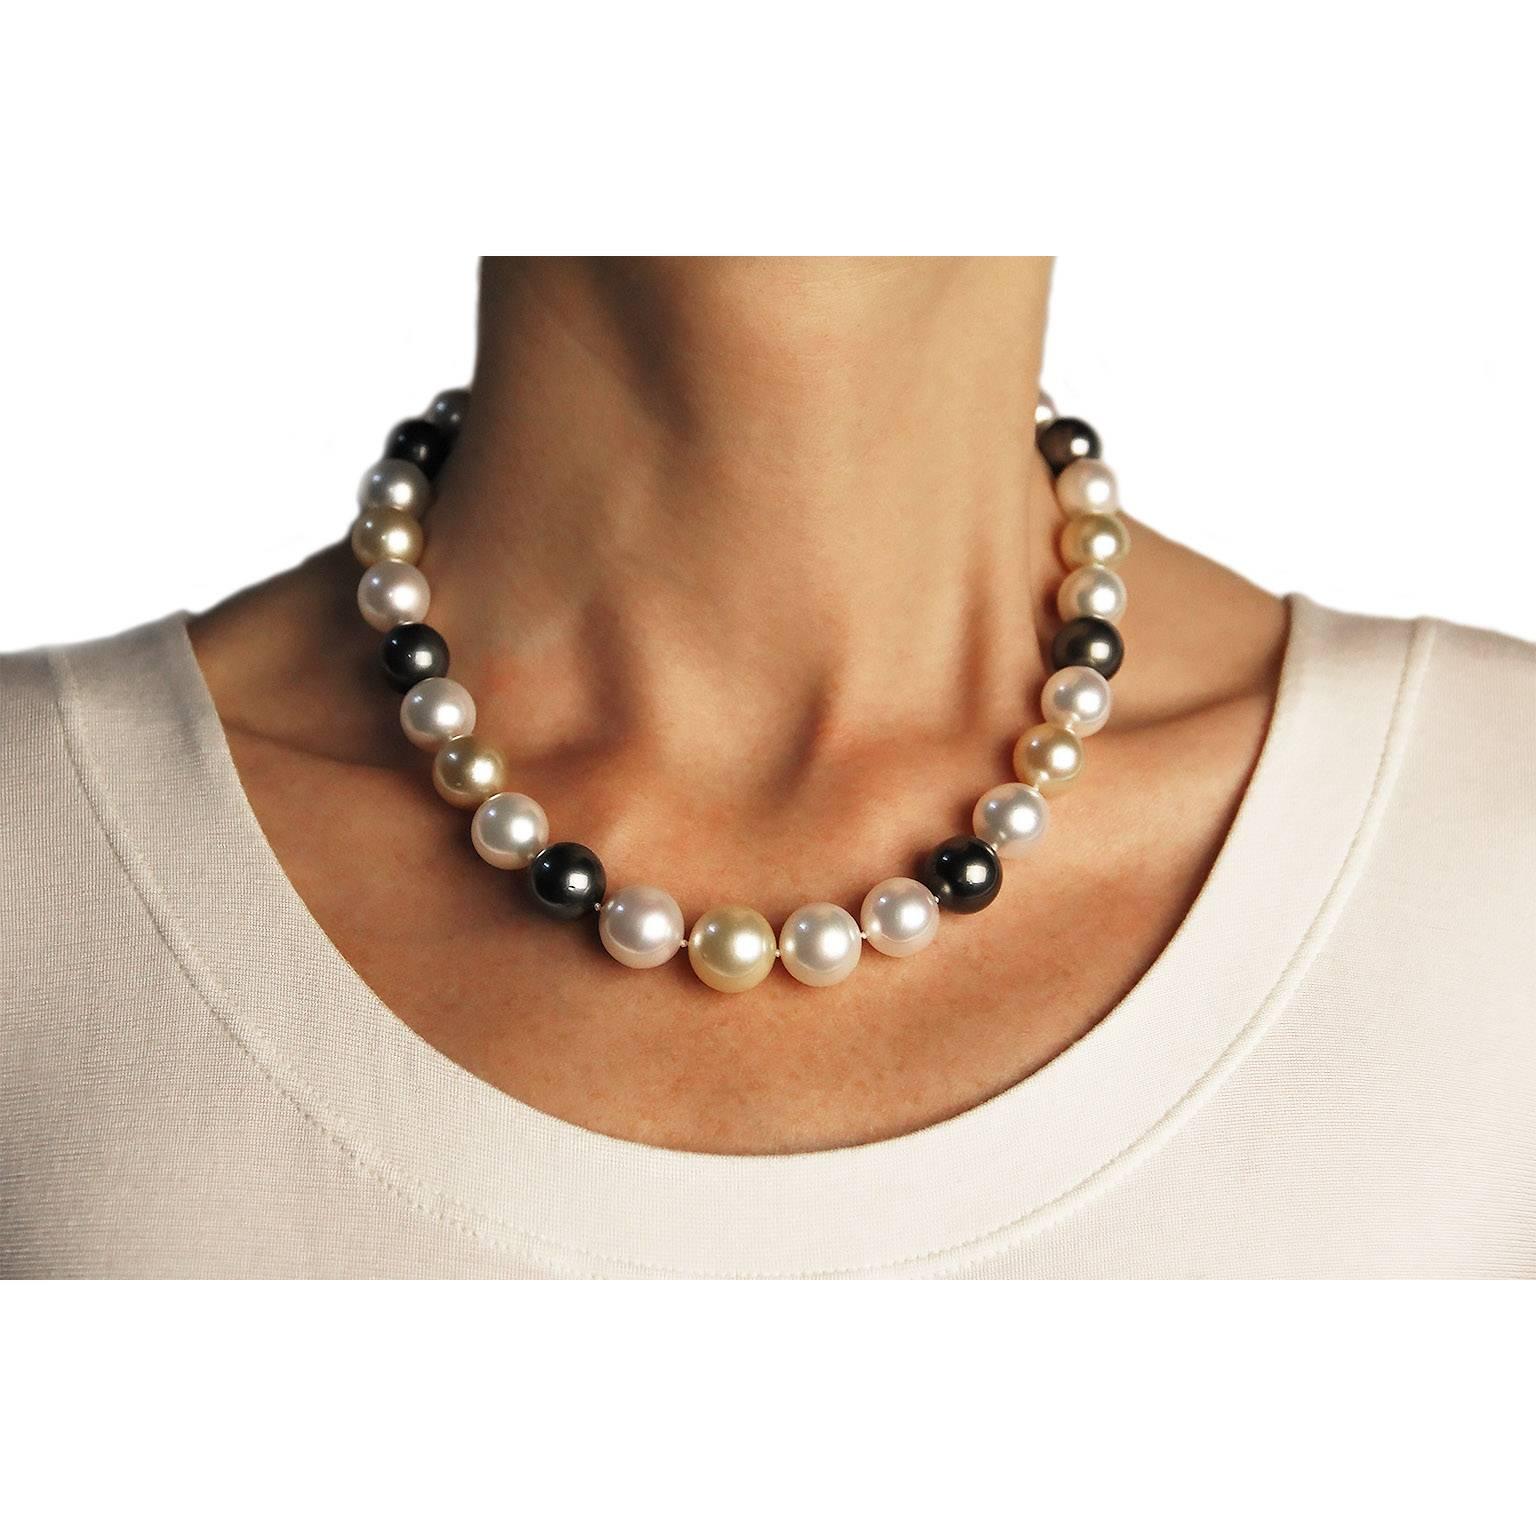 Eighteen inch long necklace consisting of thirty three, 0.45 - 0.55 in.(11.5-14.1mm ), white, gold and black South Sea pearls, the pearls are strung with an invisible clasps .

Pearl Quality: AA
Pearl Luster: AA
The Origin of the pearls are: